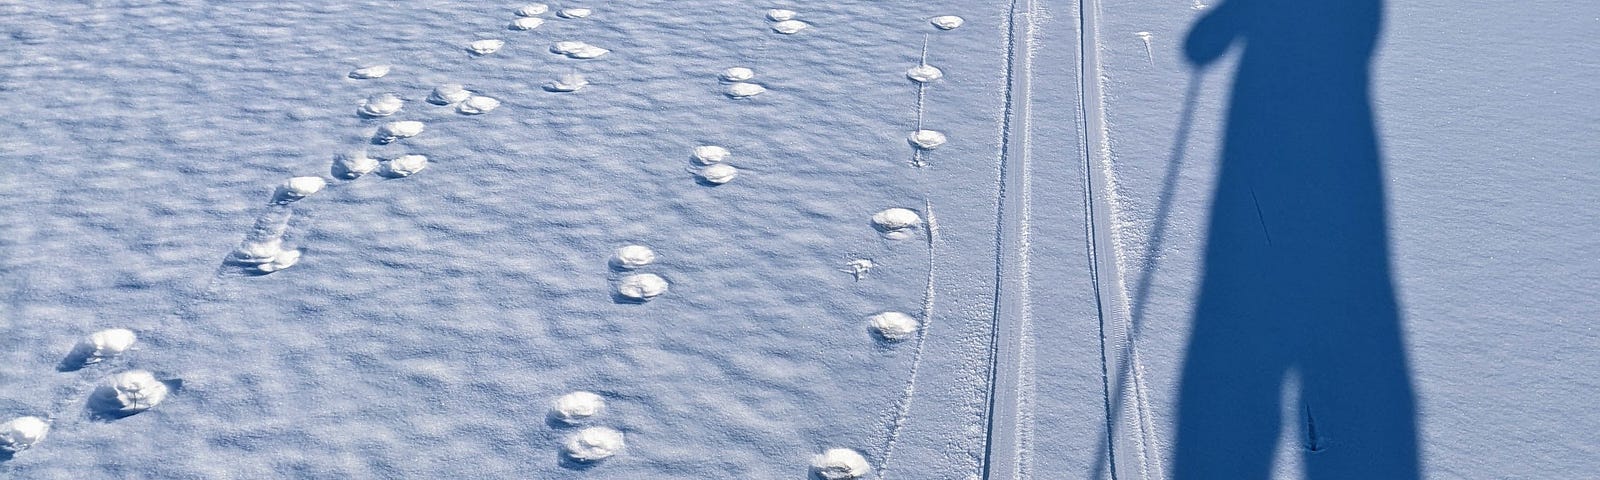 Coyote tracks and the shadow of a person in the snow.